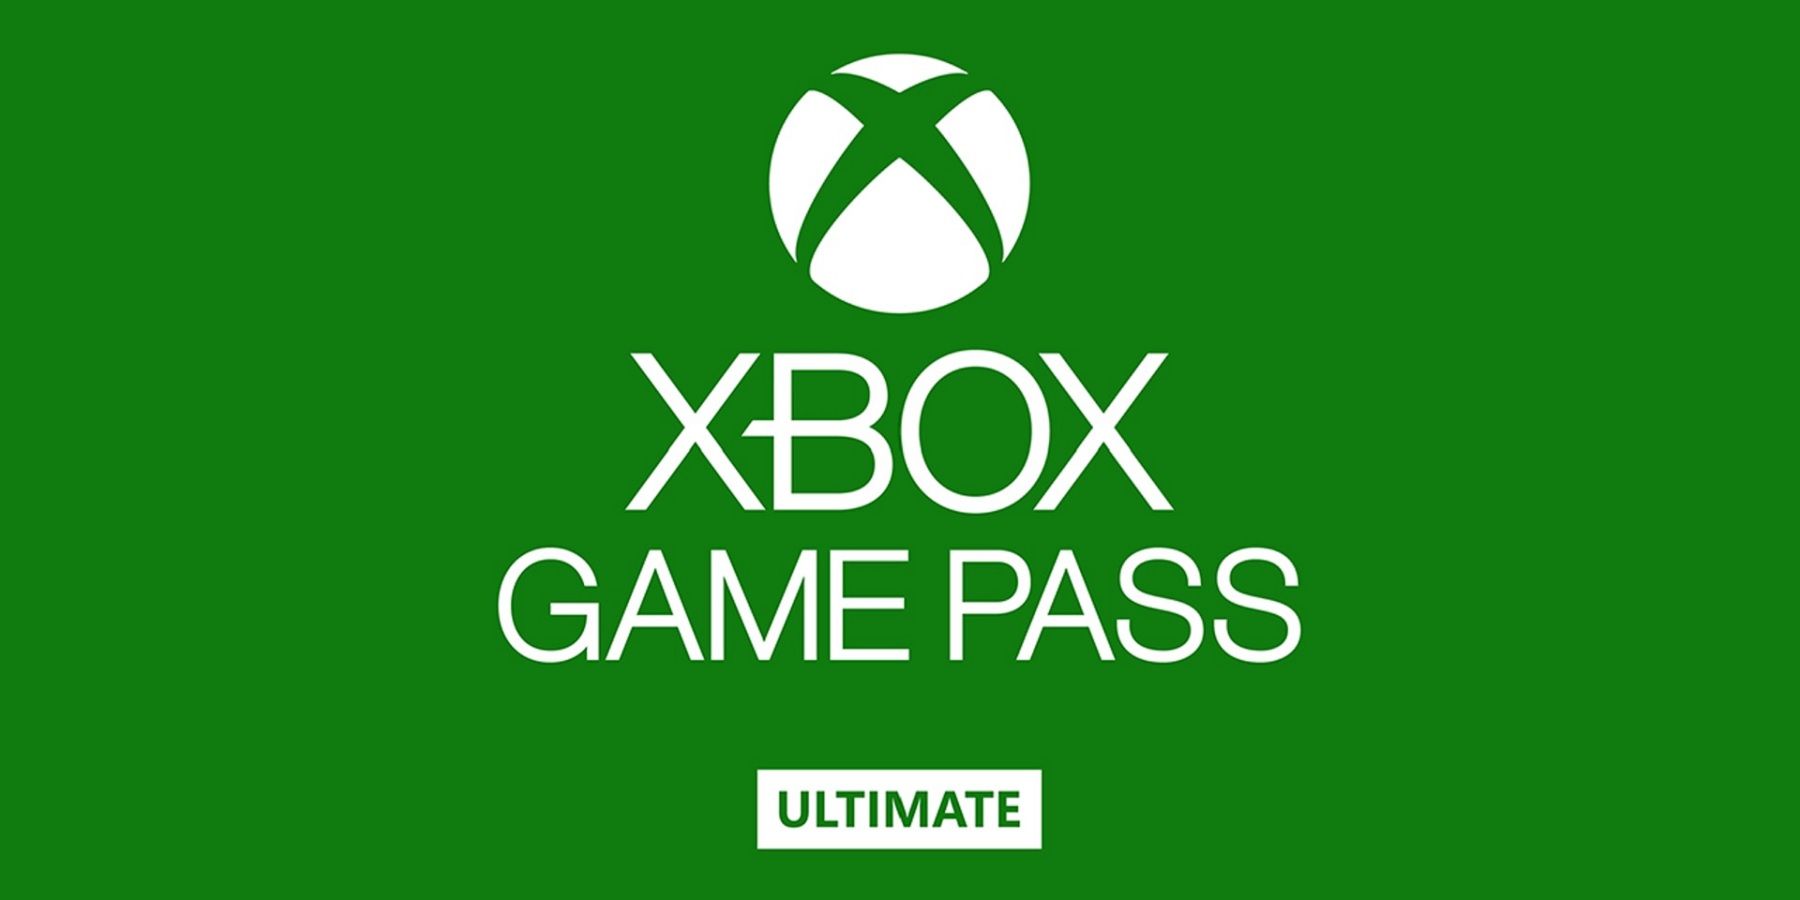 Xbox Game Pass Ultimate Adds 2 New Games Today, Including Day One Release